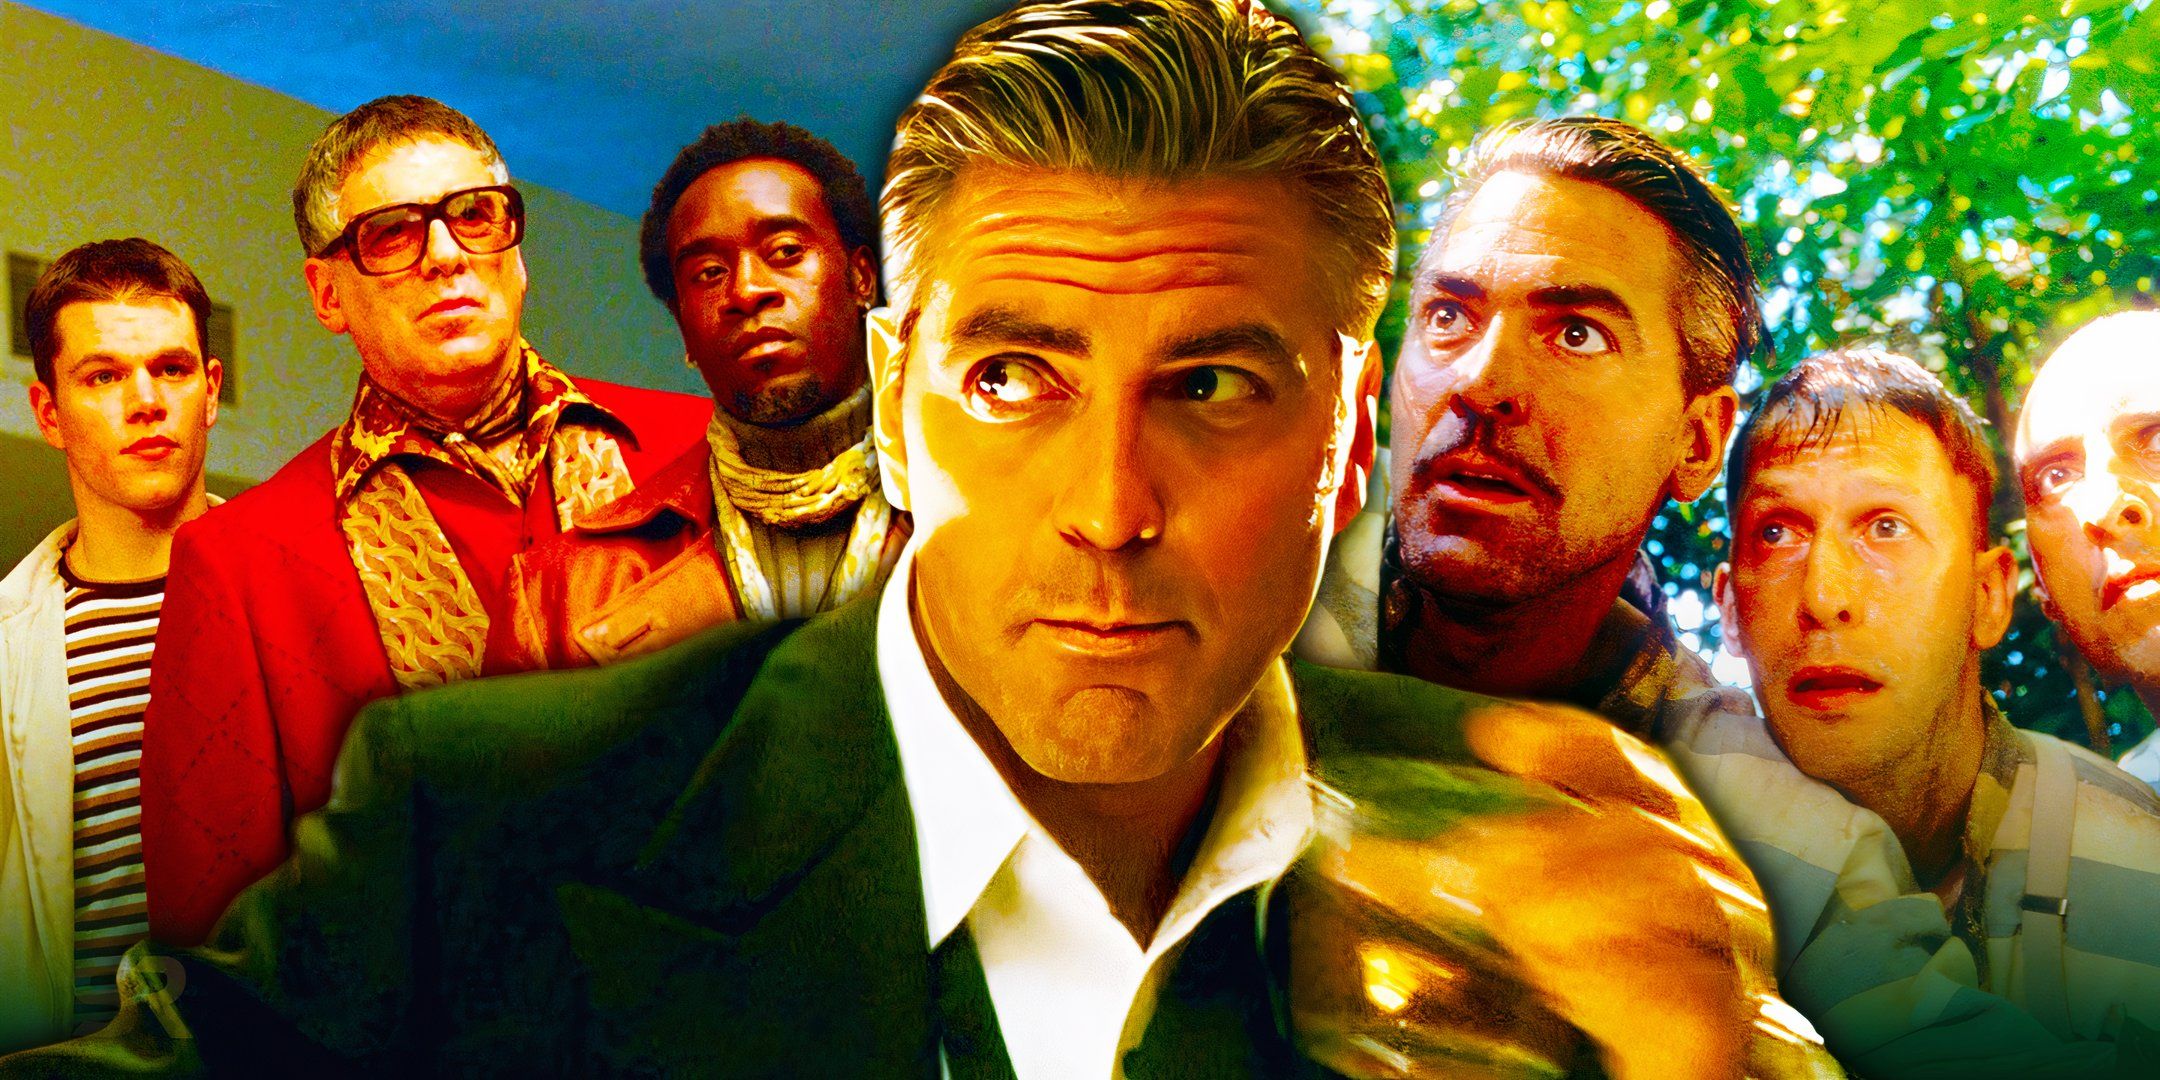 The 8 George Clooney Movies That Defined His Career